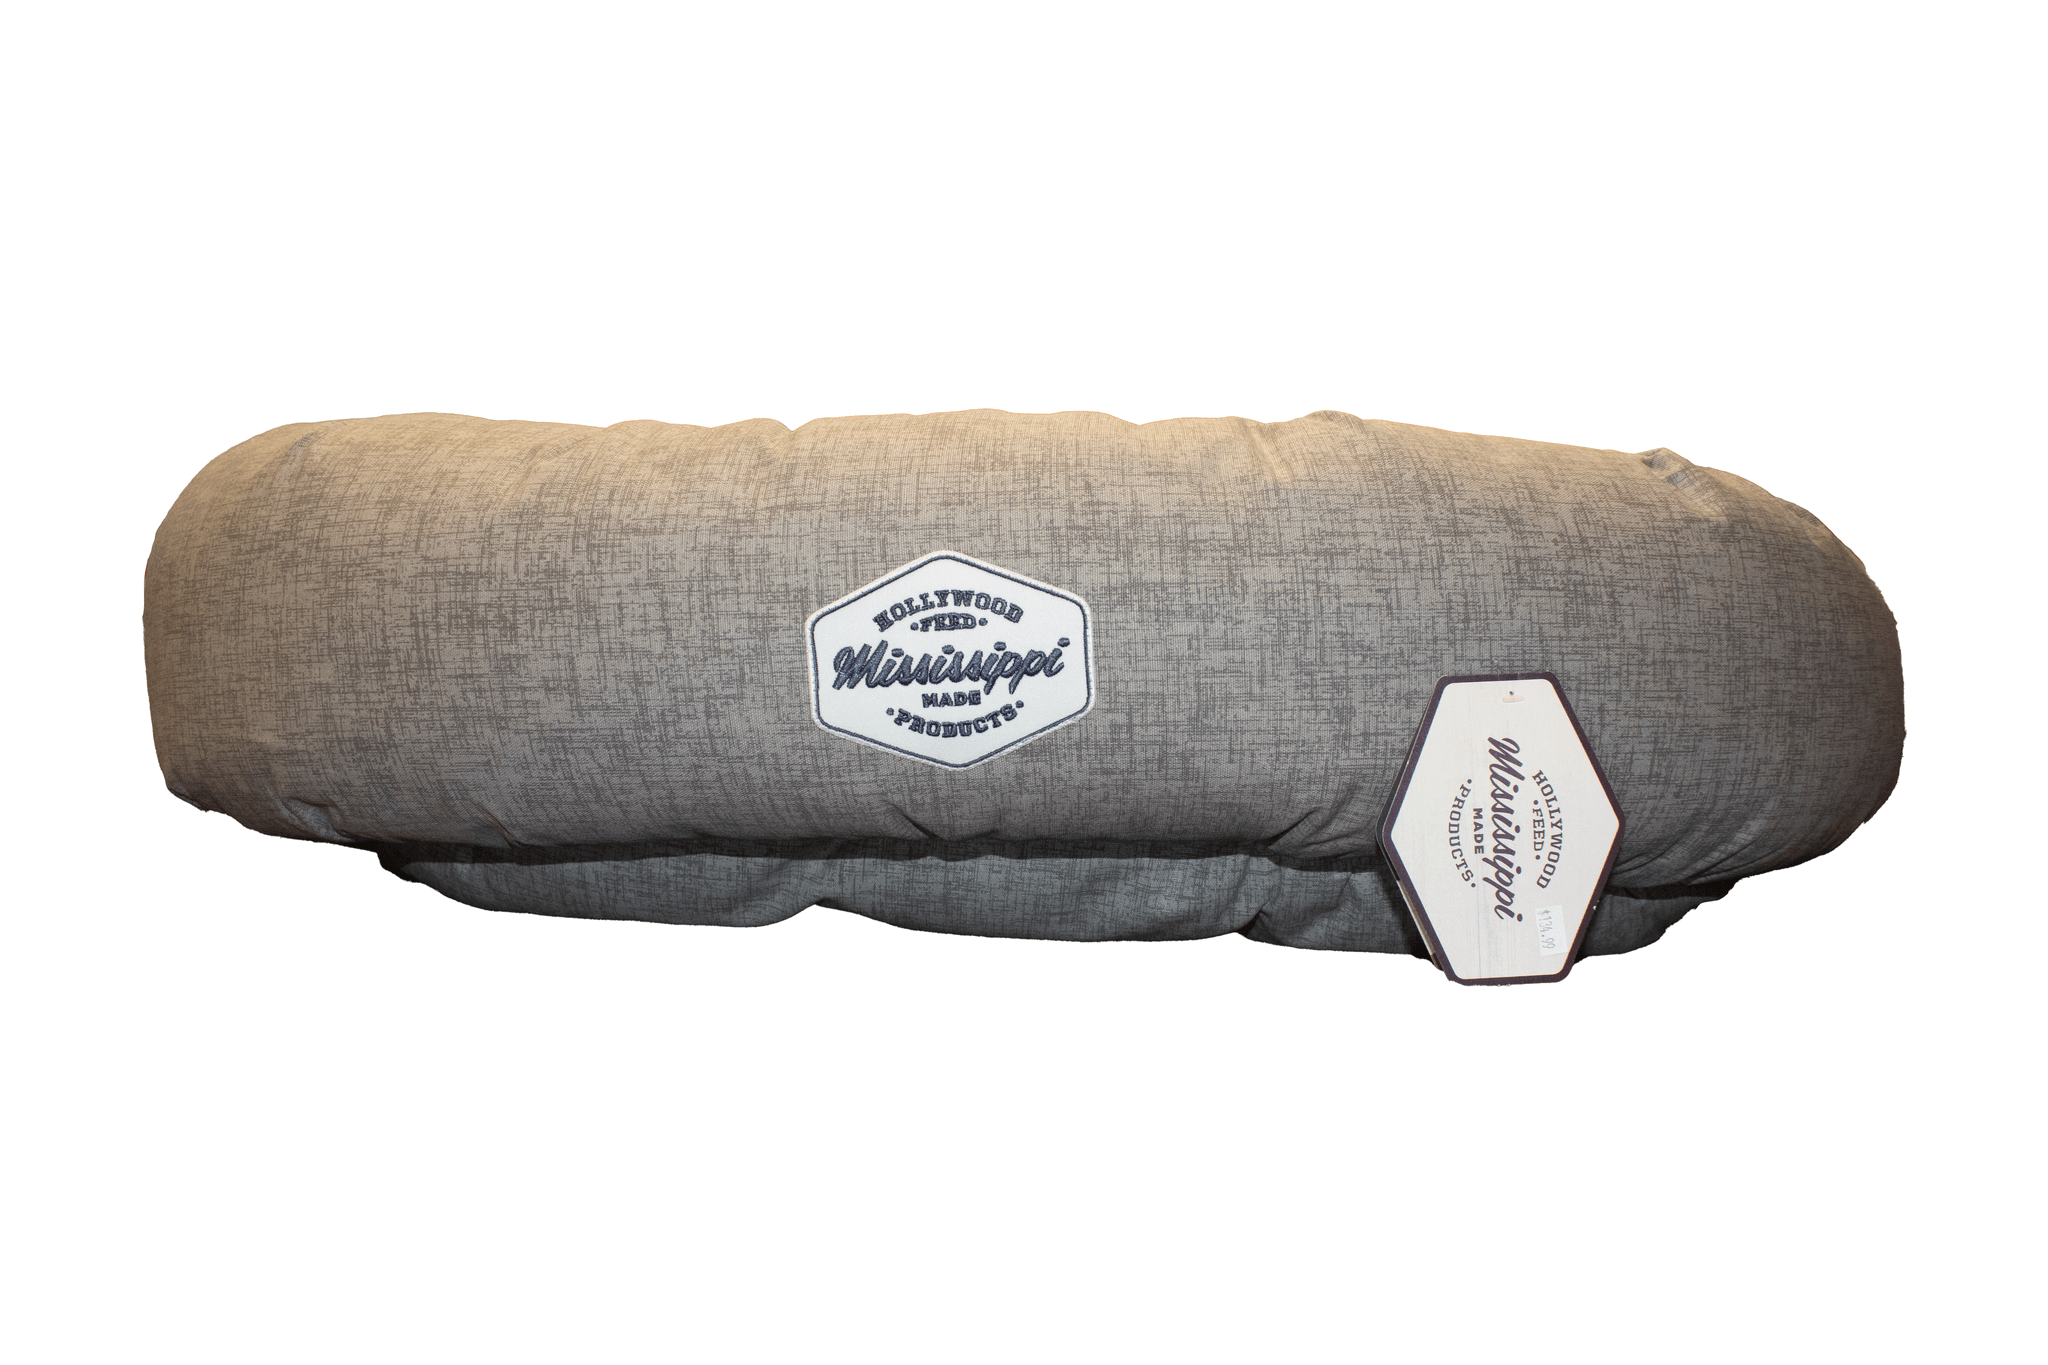 Hollywood feed mississippi made donut dog bed - solids limited edition grey